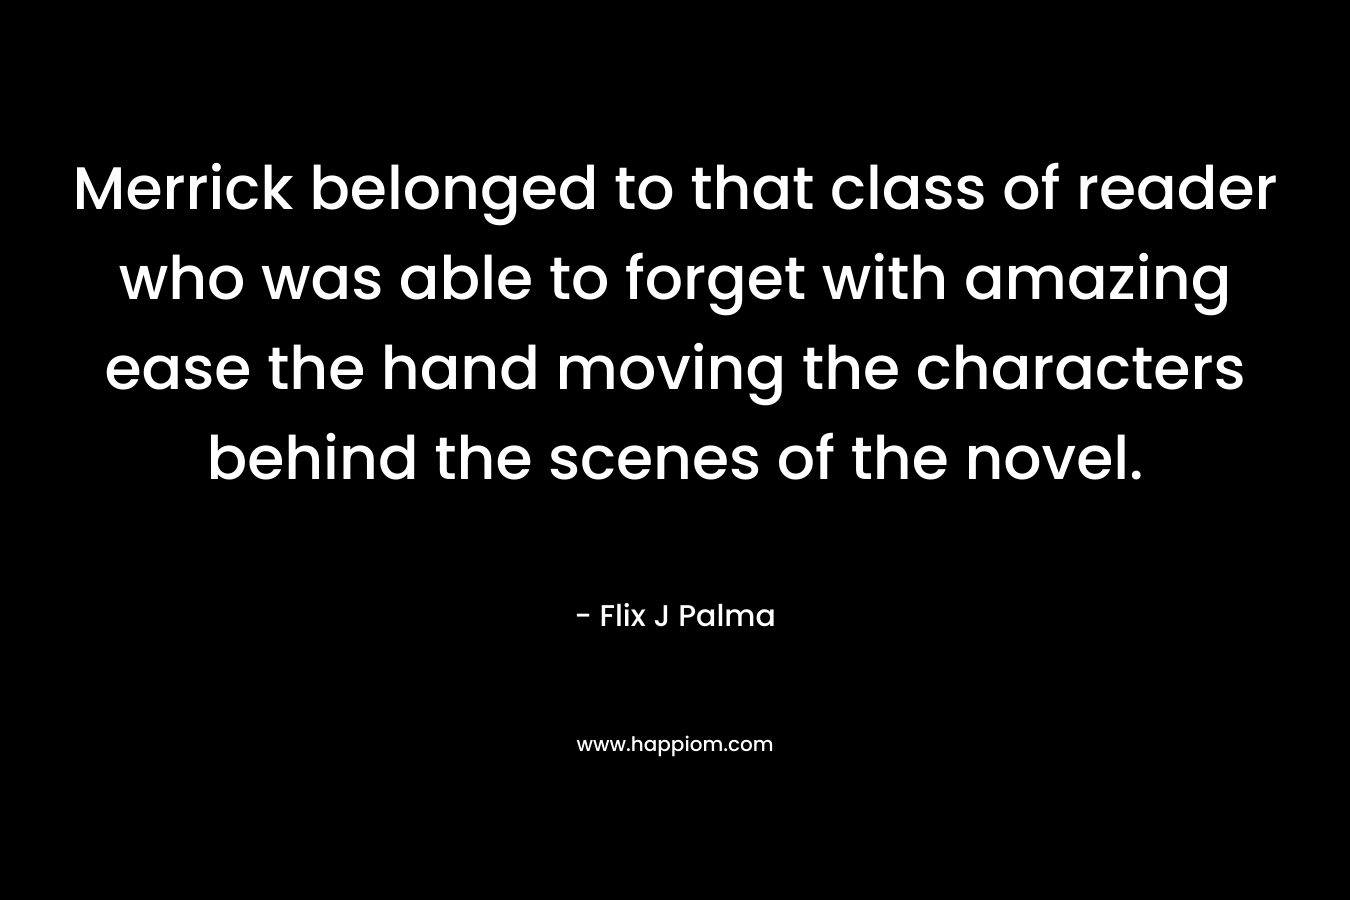 Merrick belonged to that class of reader who was able to forget with amazing ease the hand moving the characters behind the scenes of the novel. – Flix J Palma